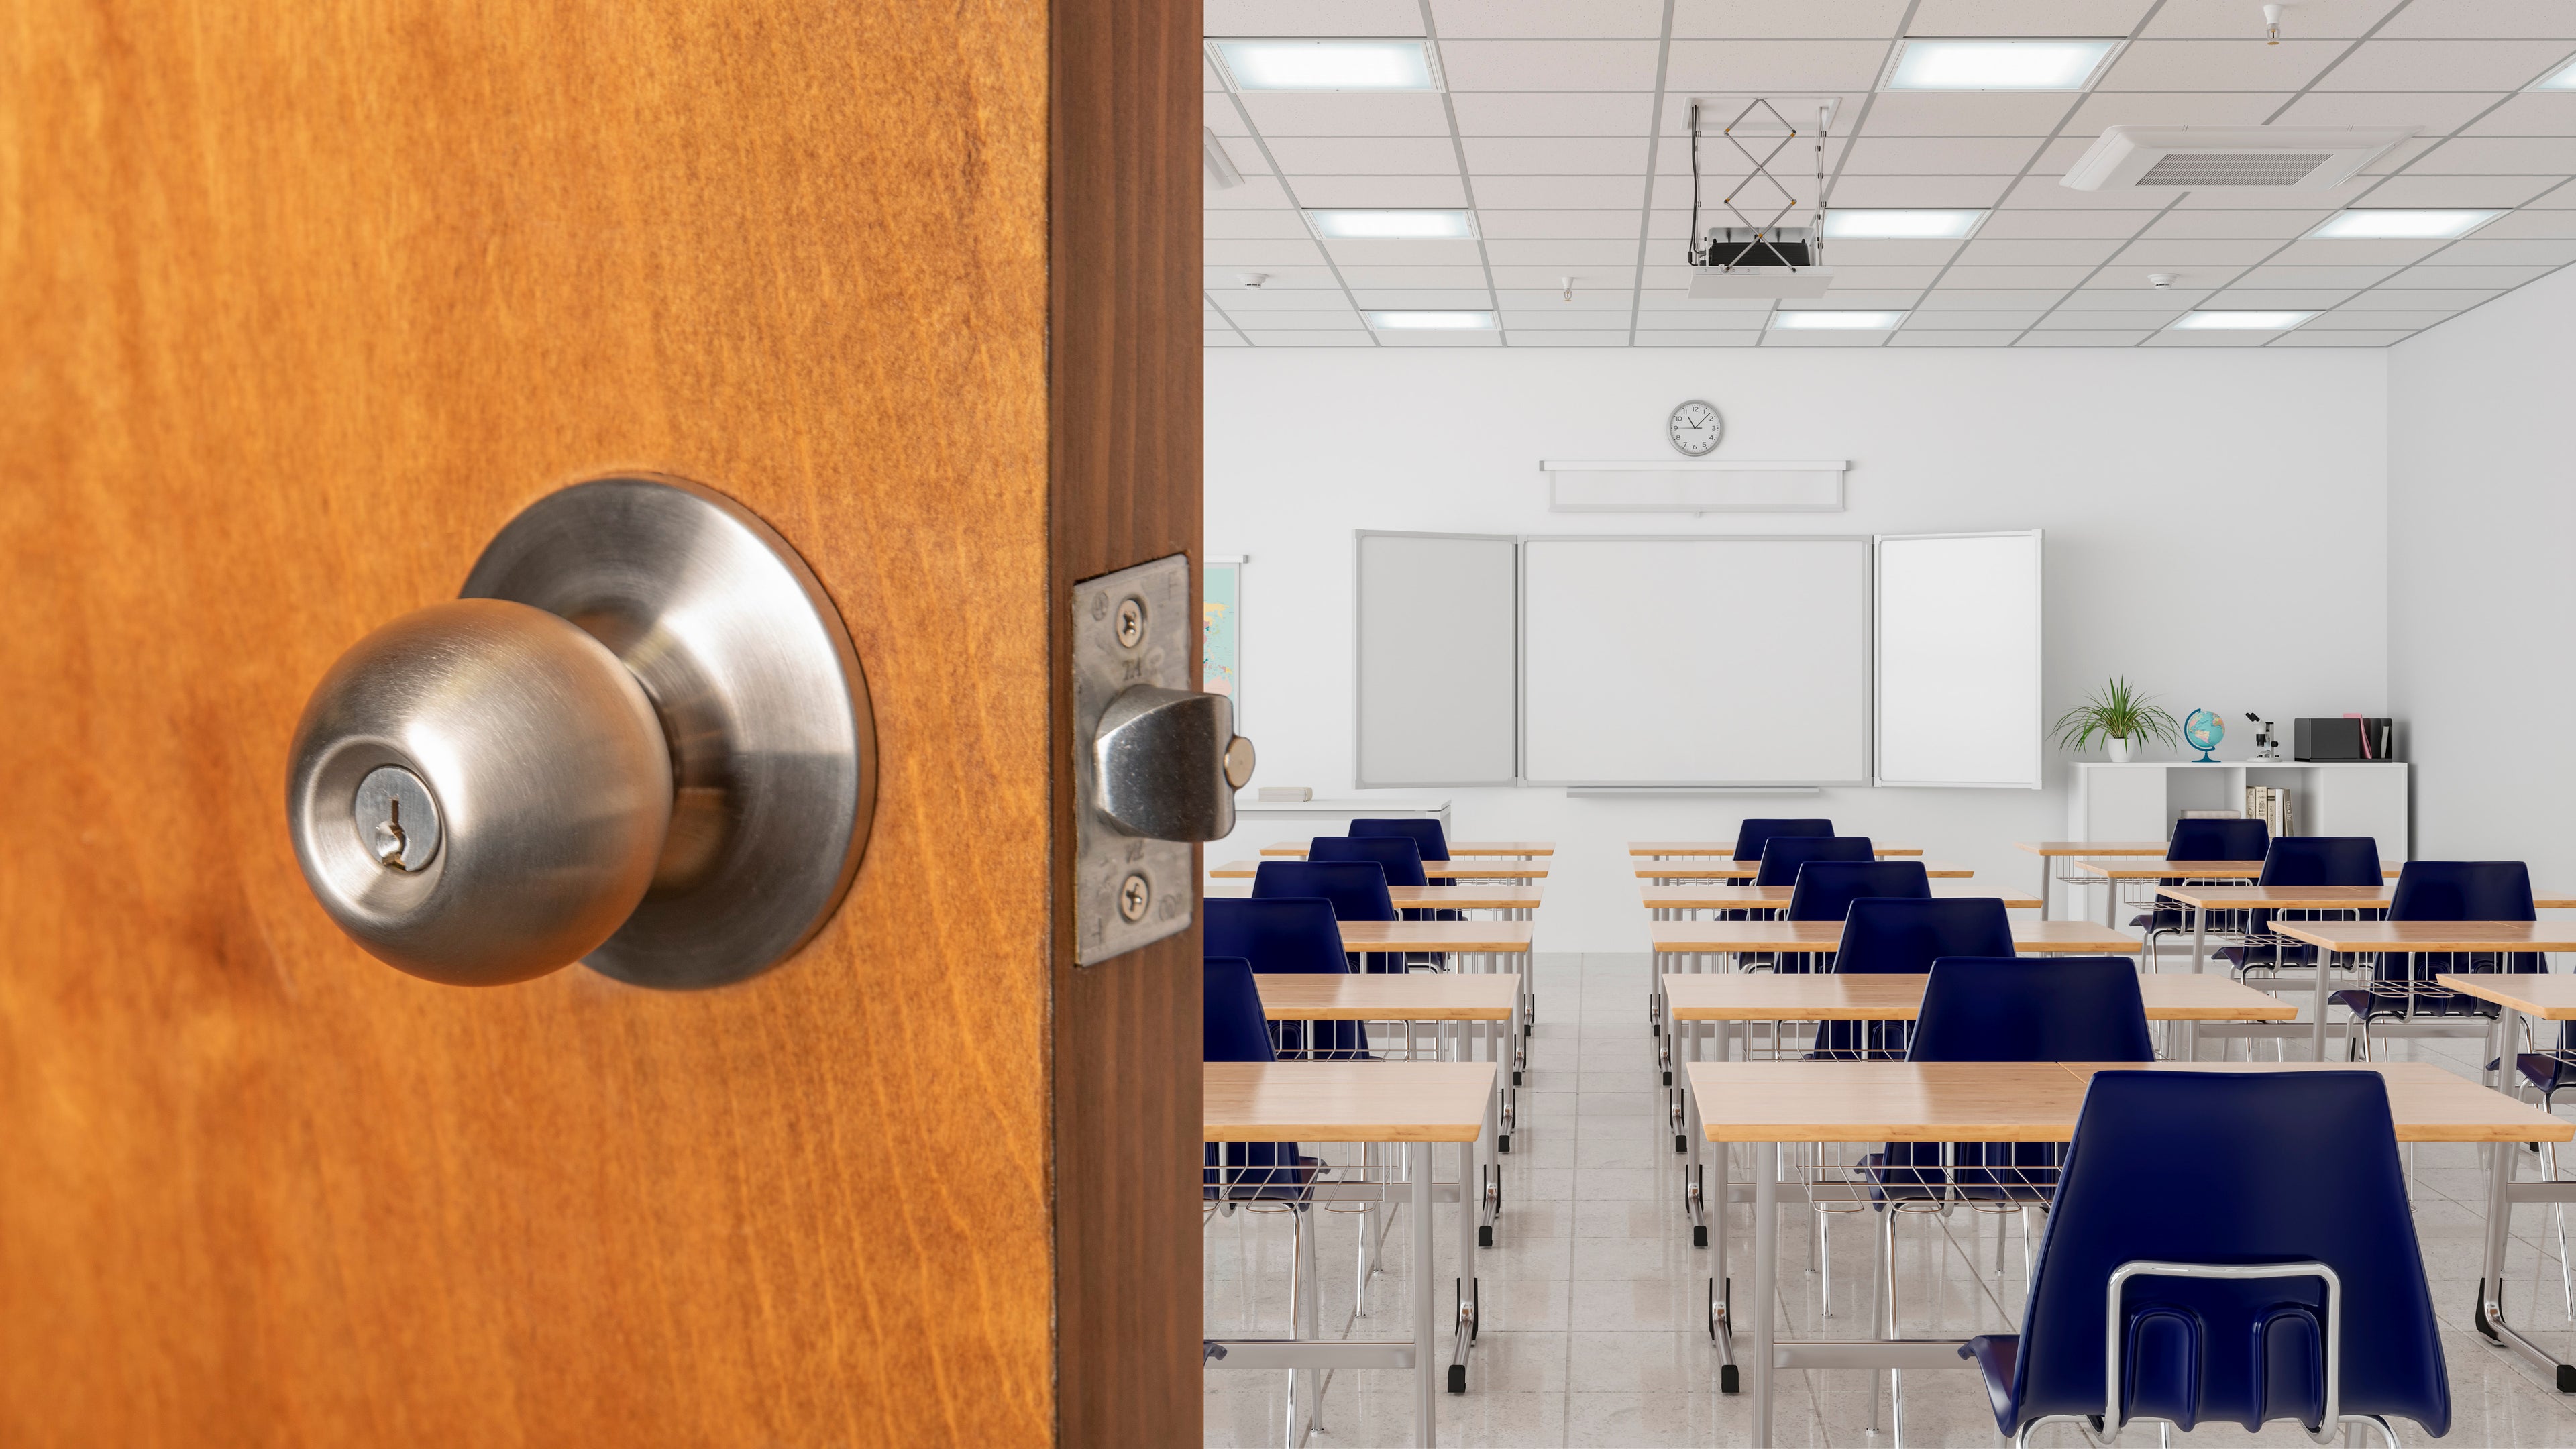 Heavy-Duty Stainless Steel Grade 1 Commercial Classroom Door Knob with Lock and IC Core